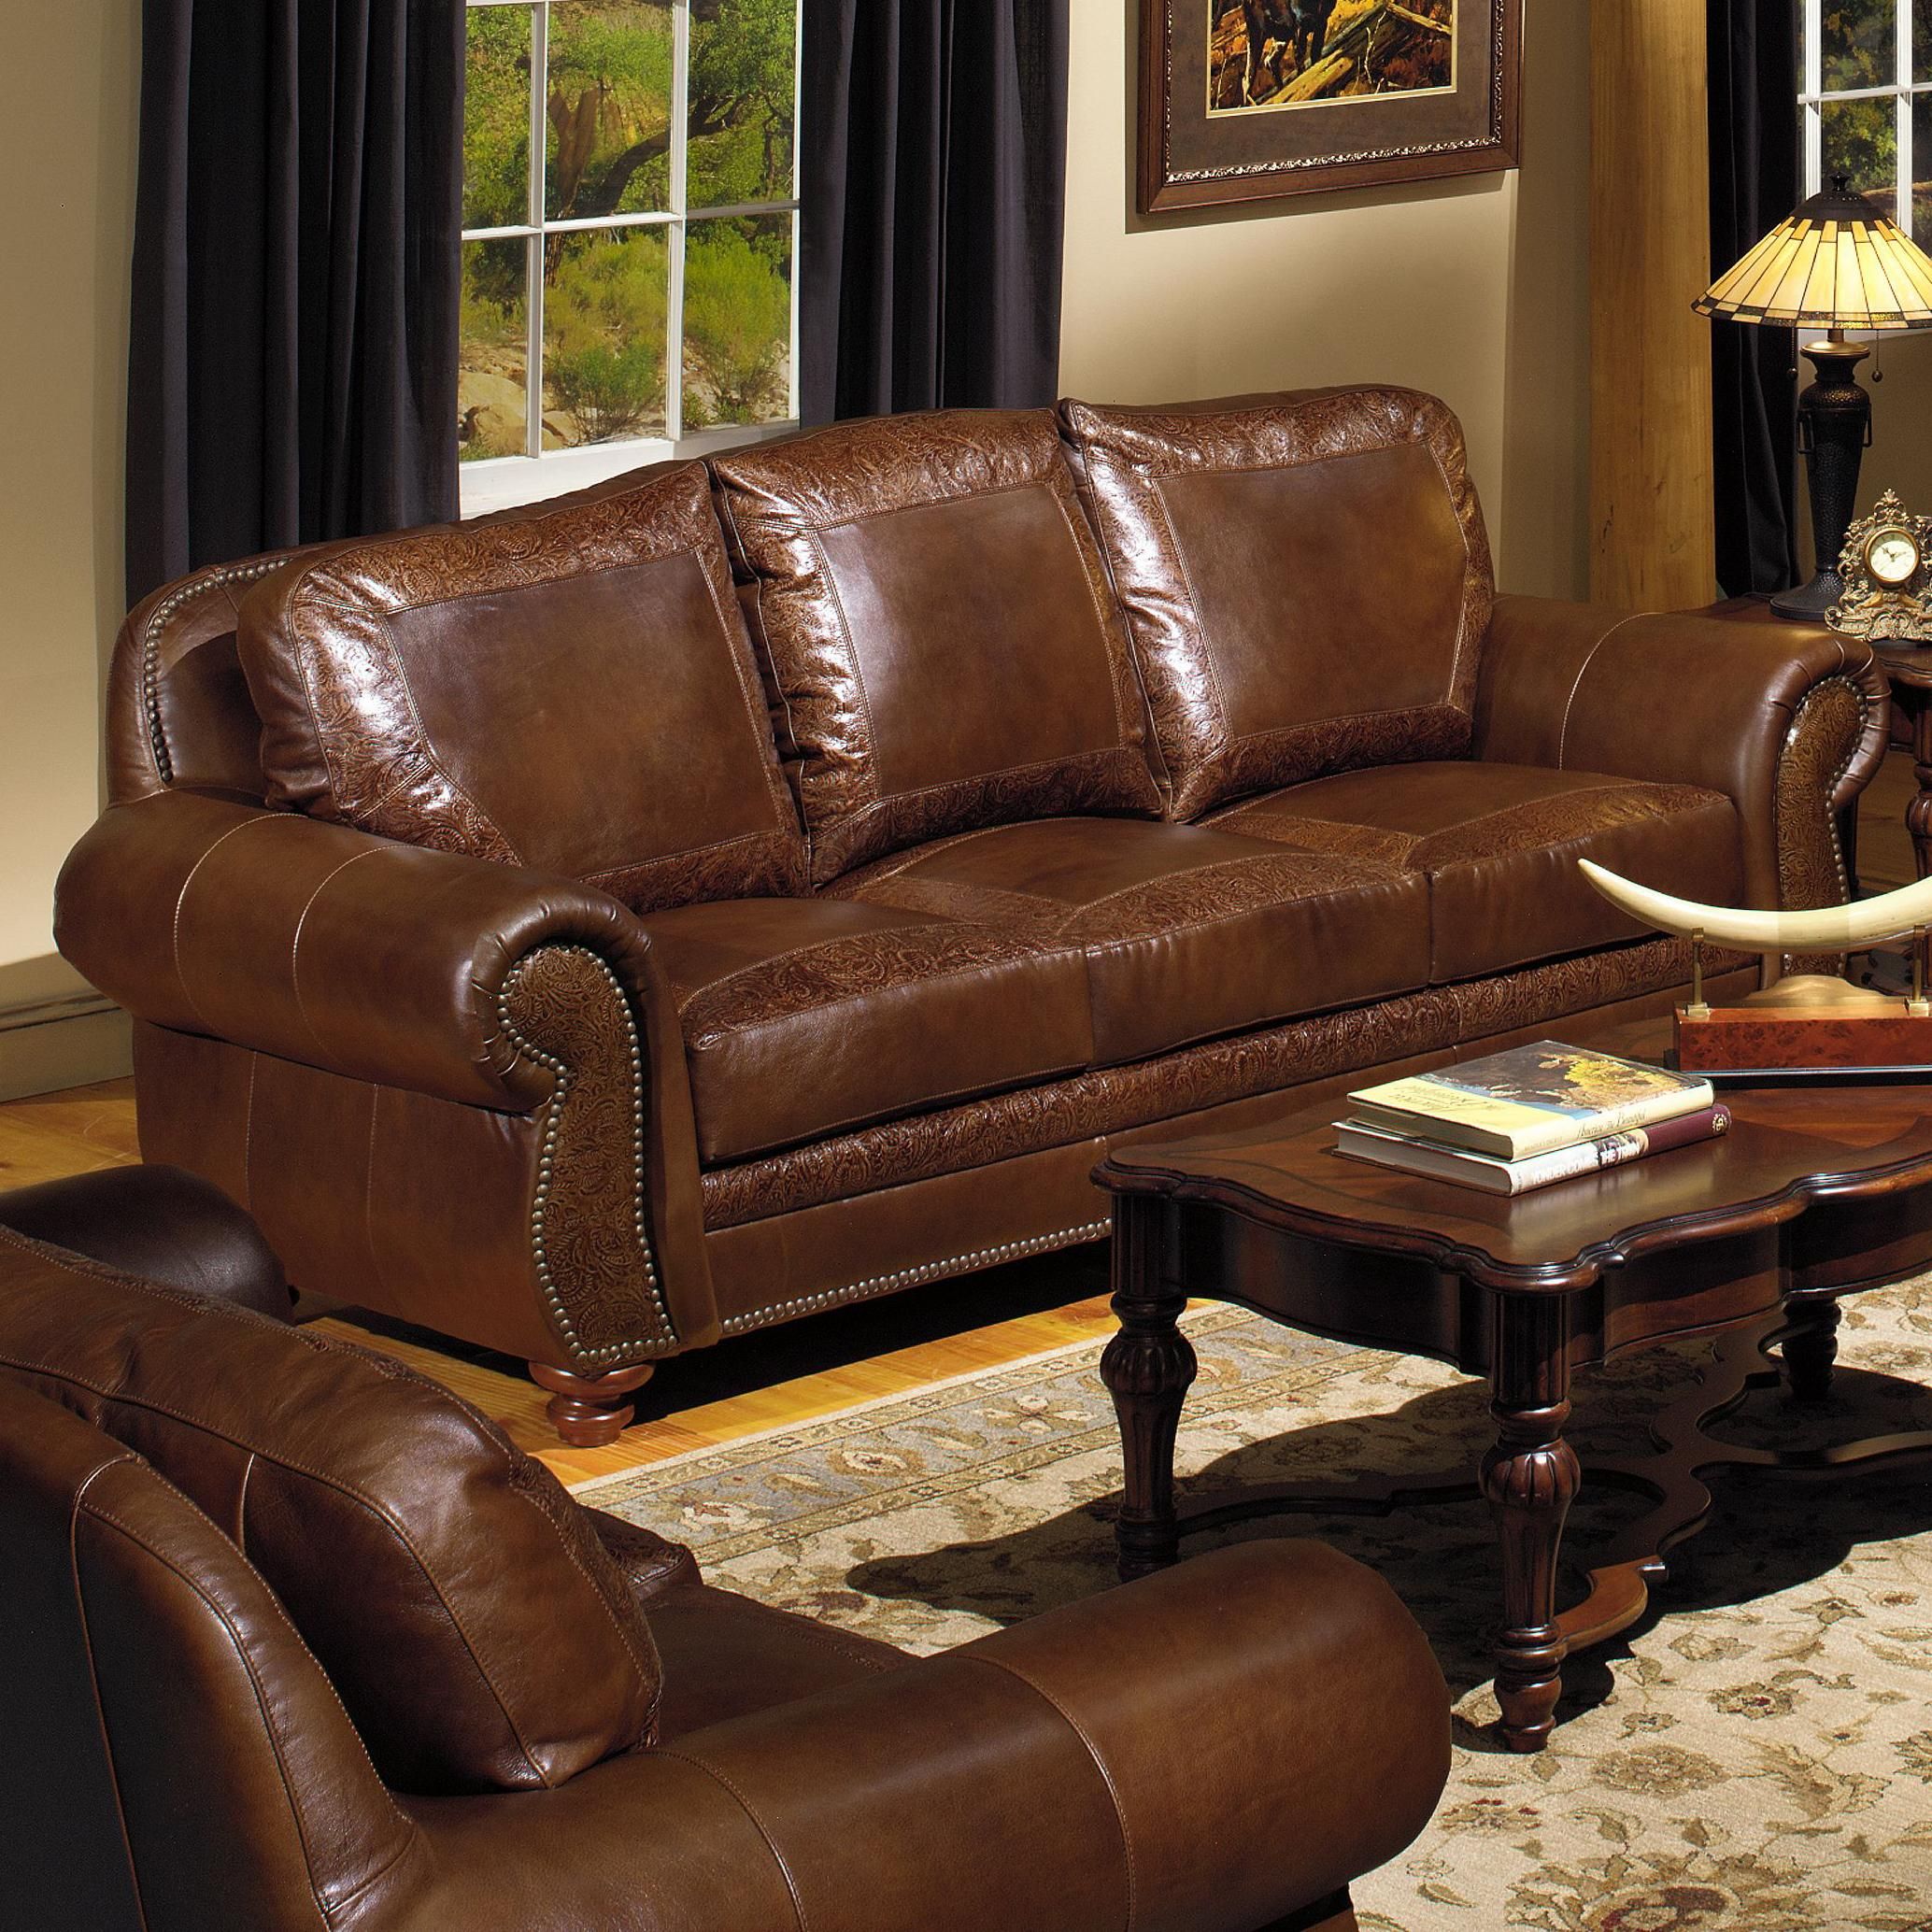 Brown Top Grain Leather Sofa In Sofas With Ottomans In Brown (View 7 of 20)